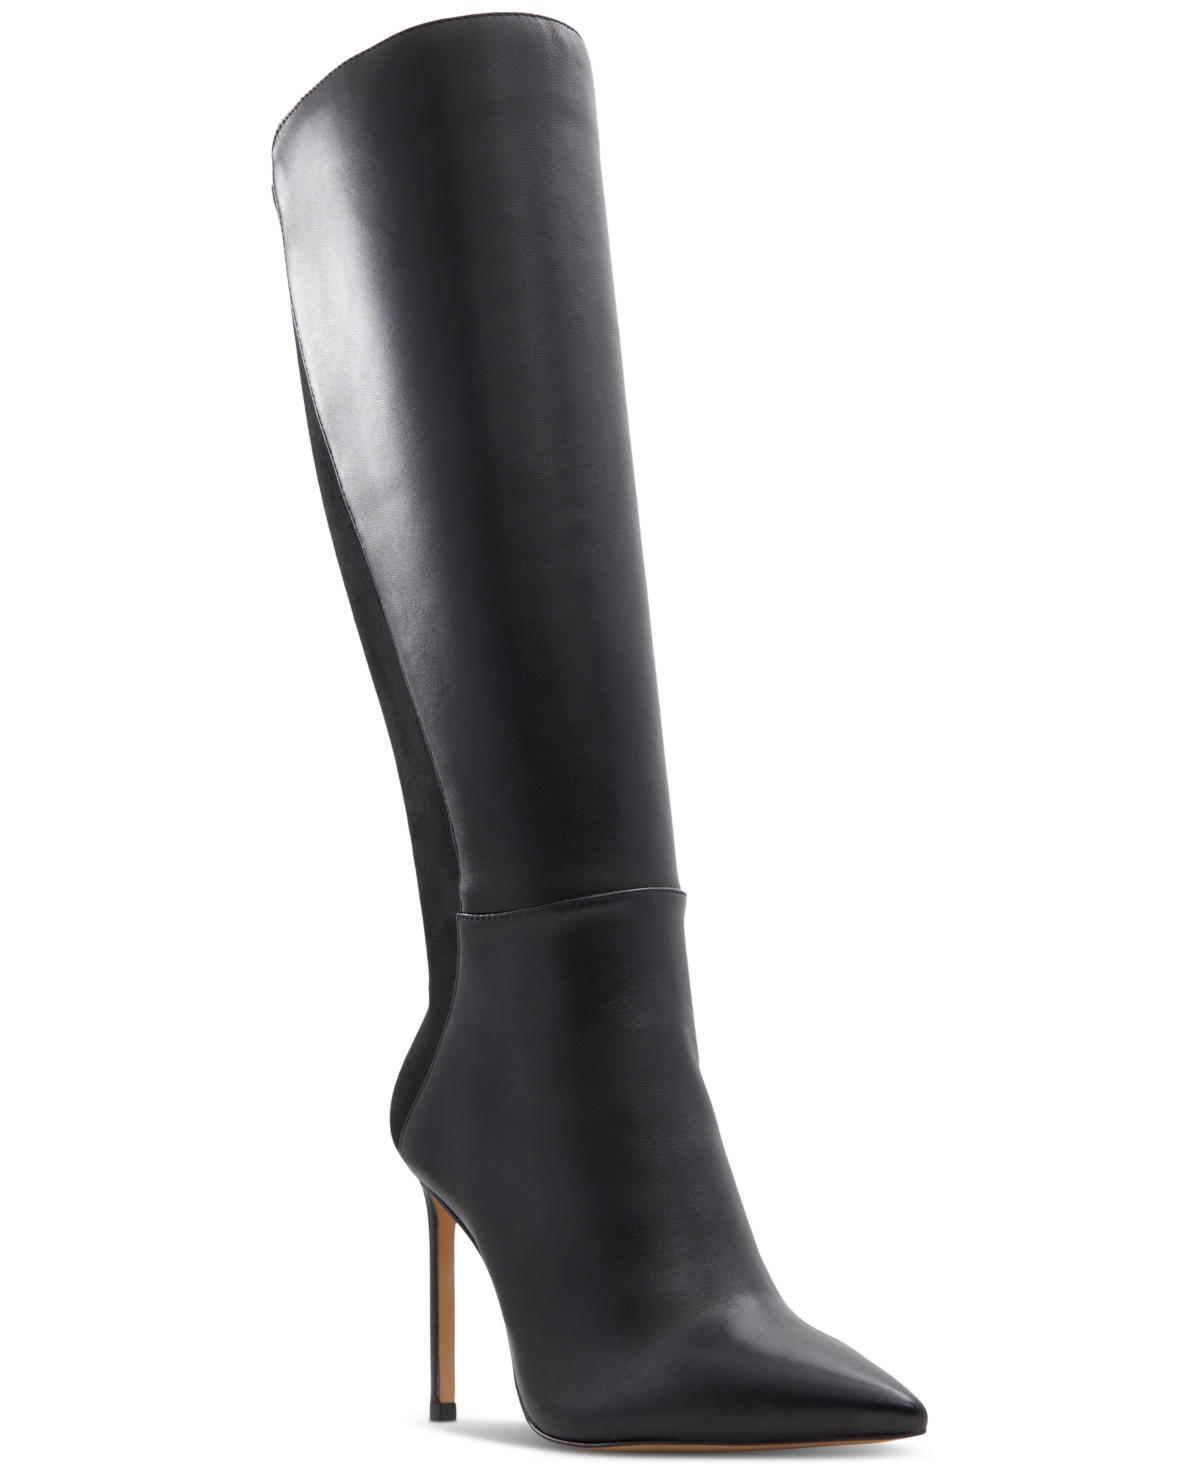 Women's Milann Pointed-Toe Tall Boots - Black